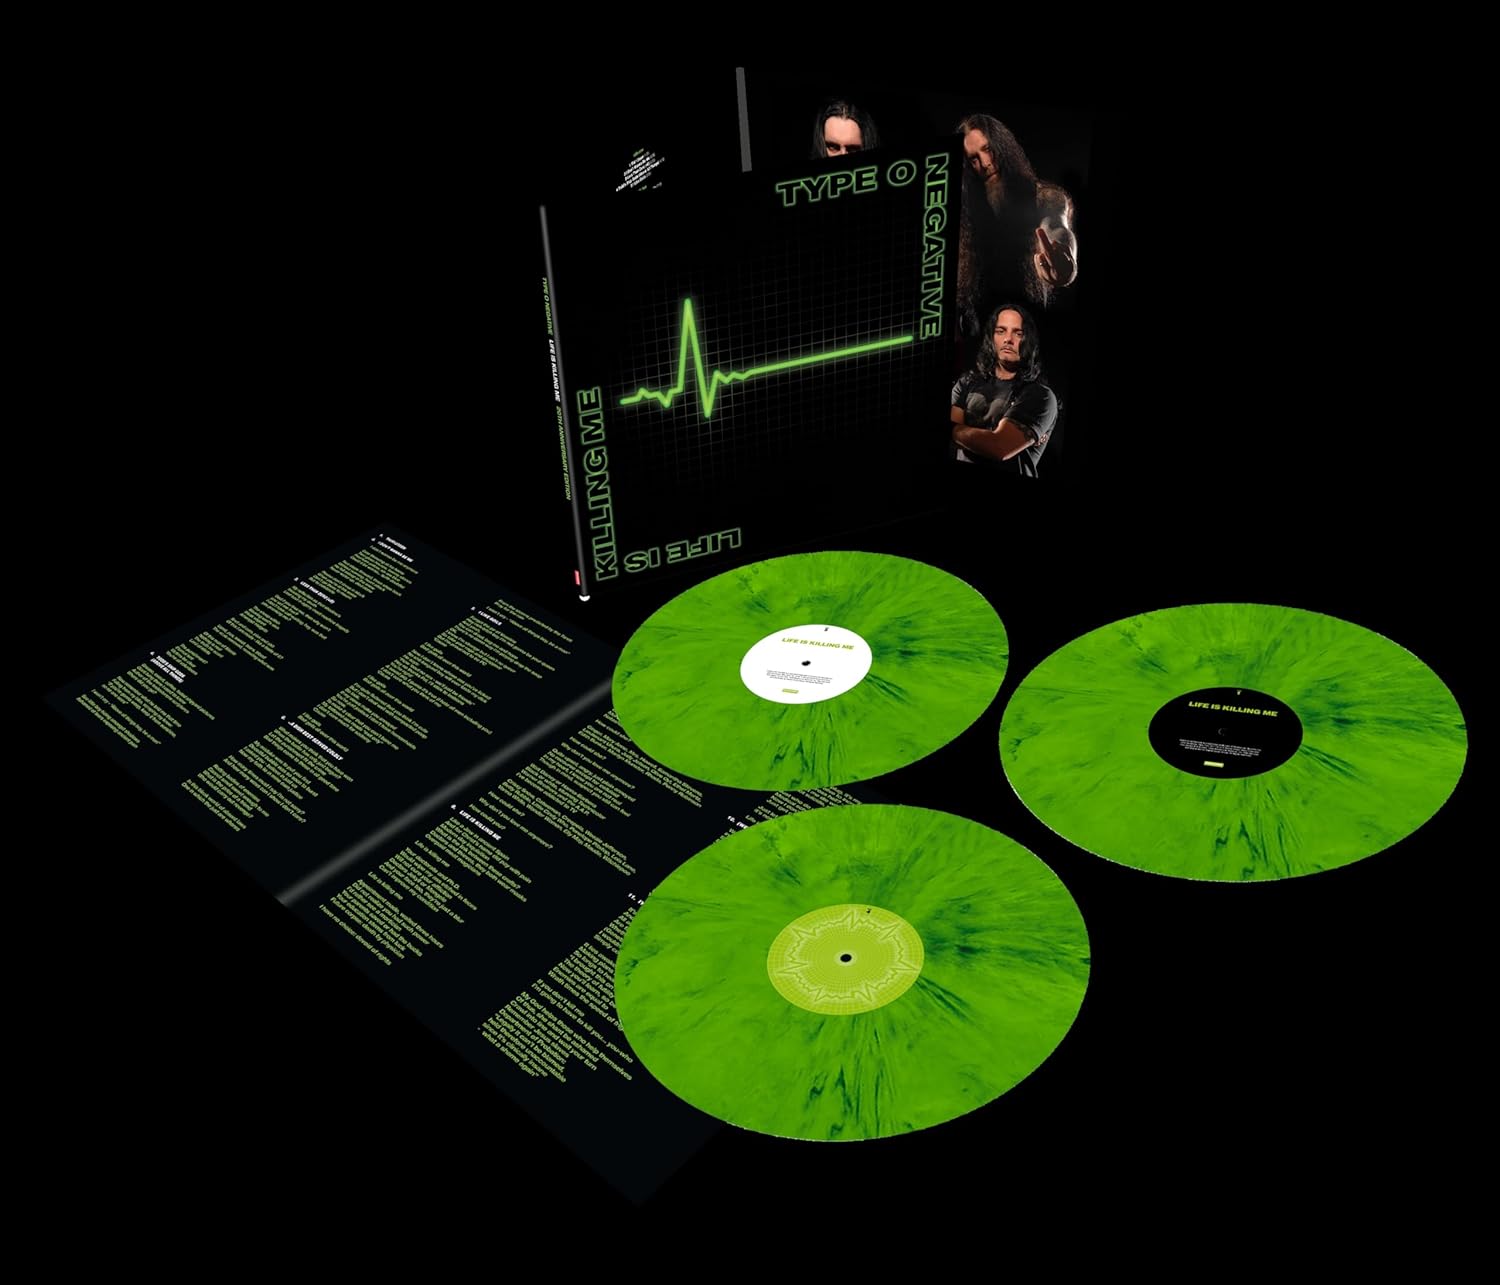 TYPE O NEGATIVE - LIFE IS KILLING ME 20TH ANNIVERSARY LIMITED VINYL 3LP